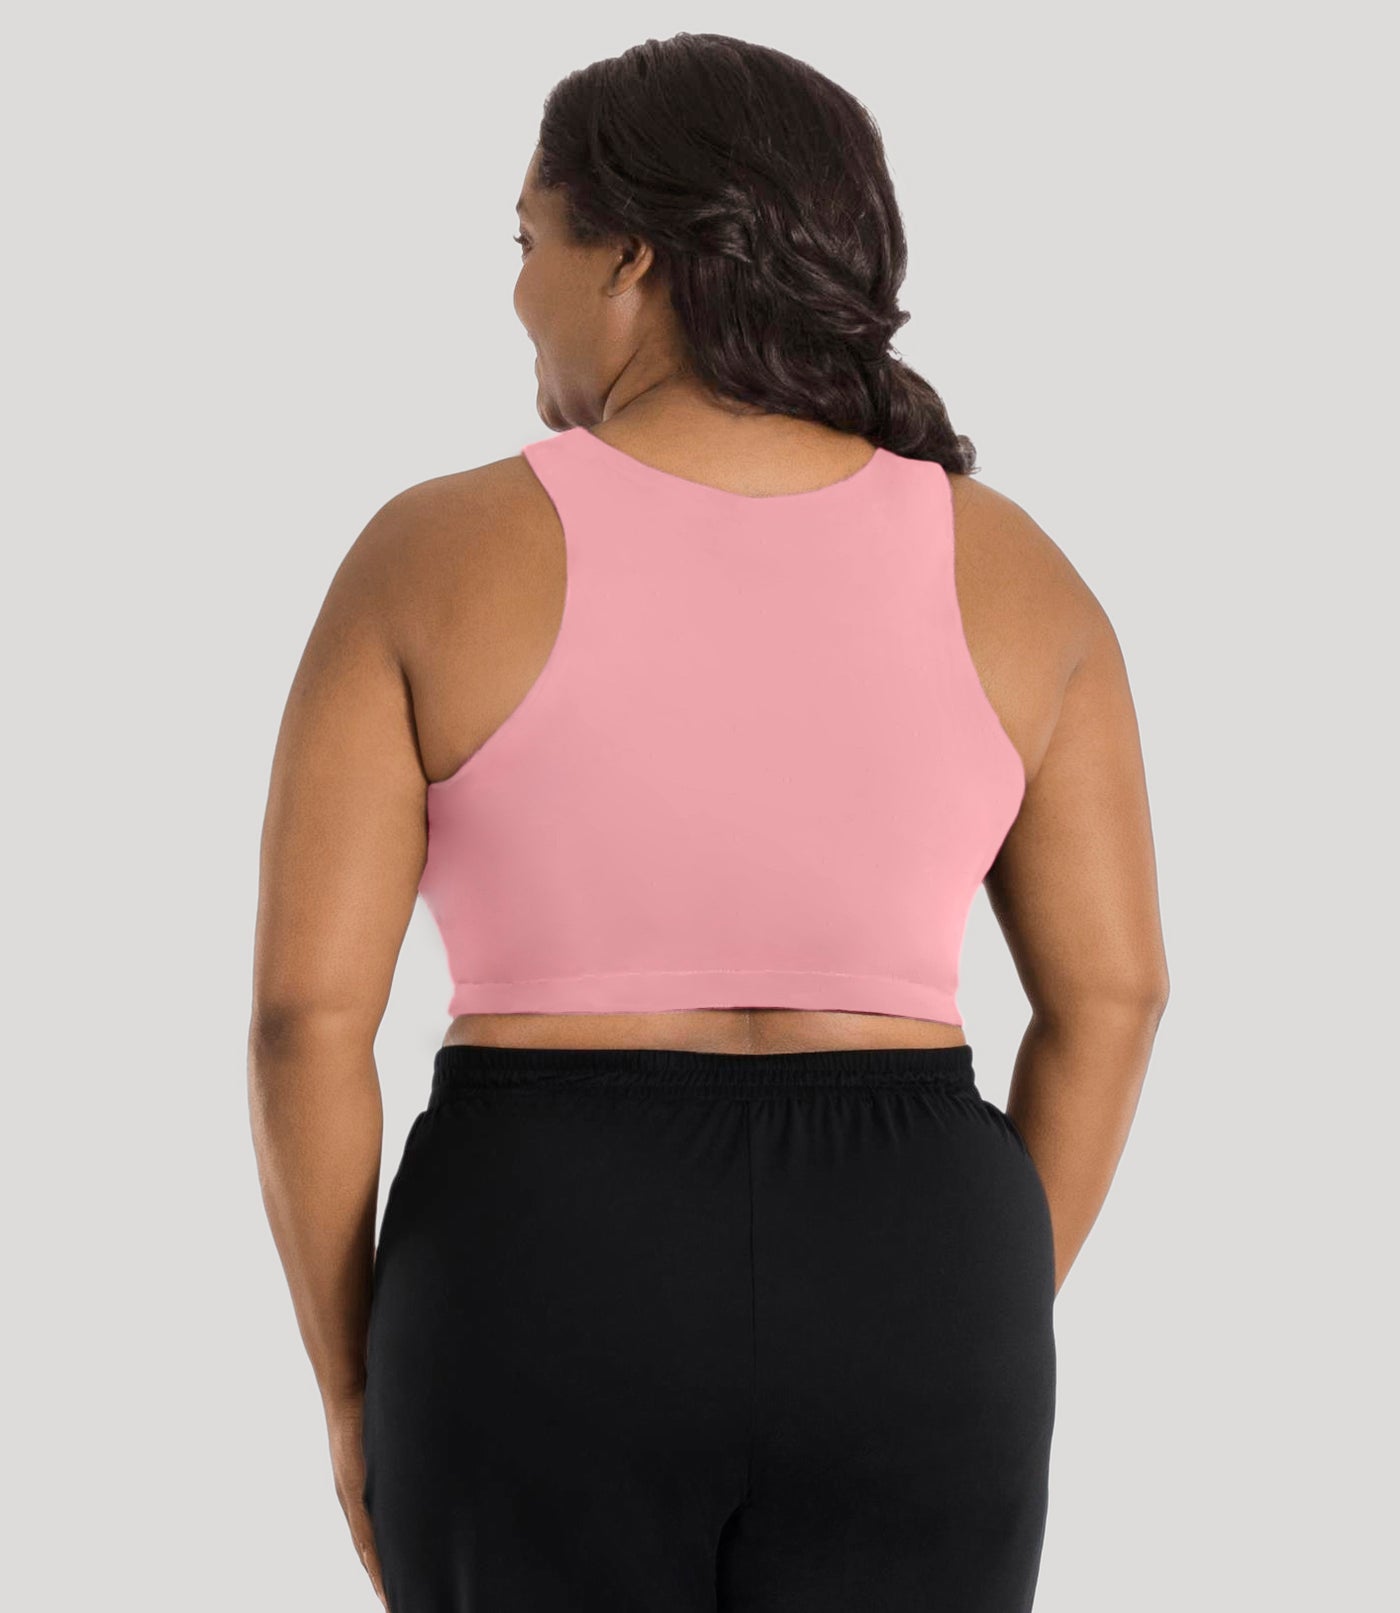 Plus size model, facing back, wearing stretch naturals full fit V-neck plus size bra in color peach fizz.